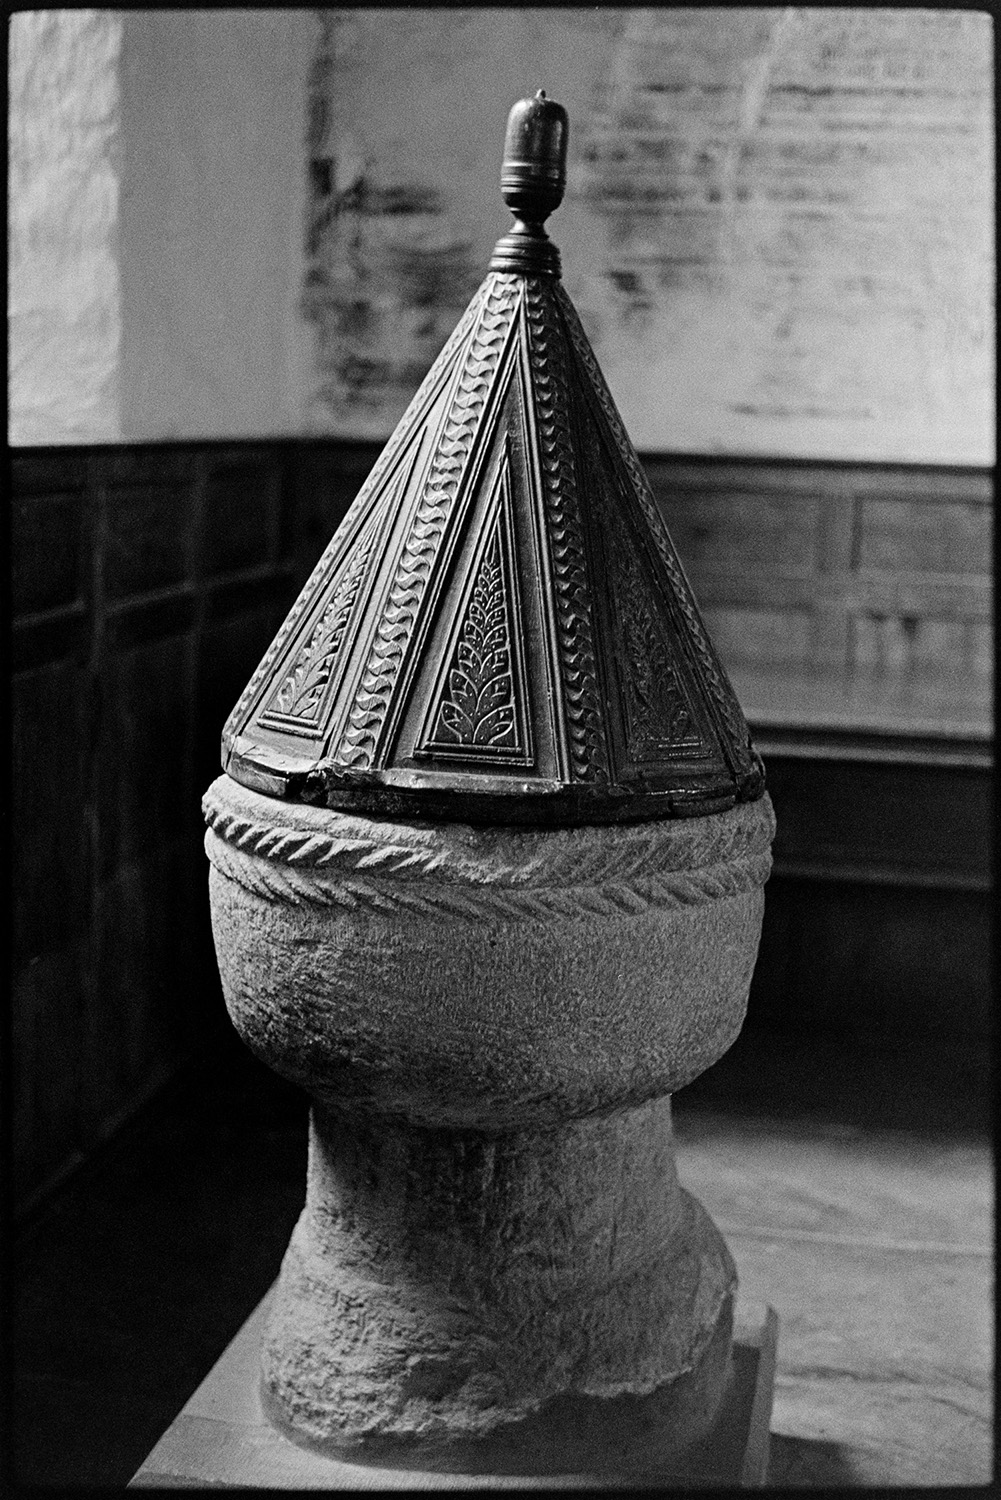 Norman font with conical wood cover. 
[A Norman font with a cone shaped carved wooden cover in Launcells Church.]